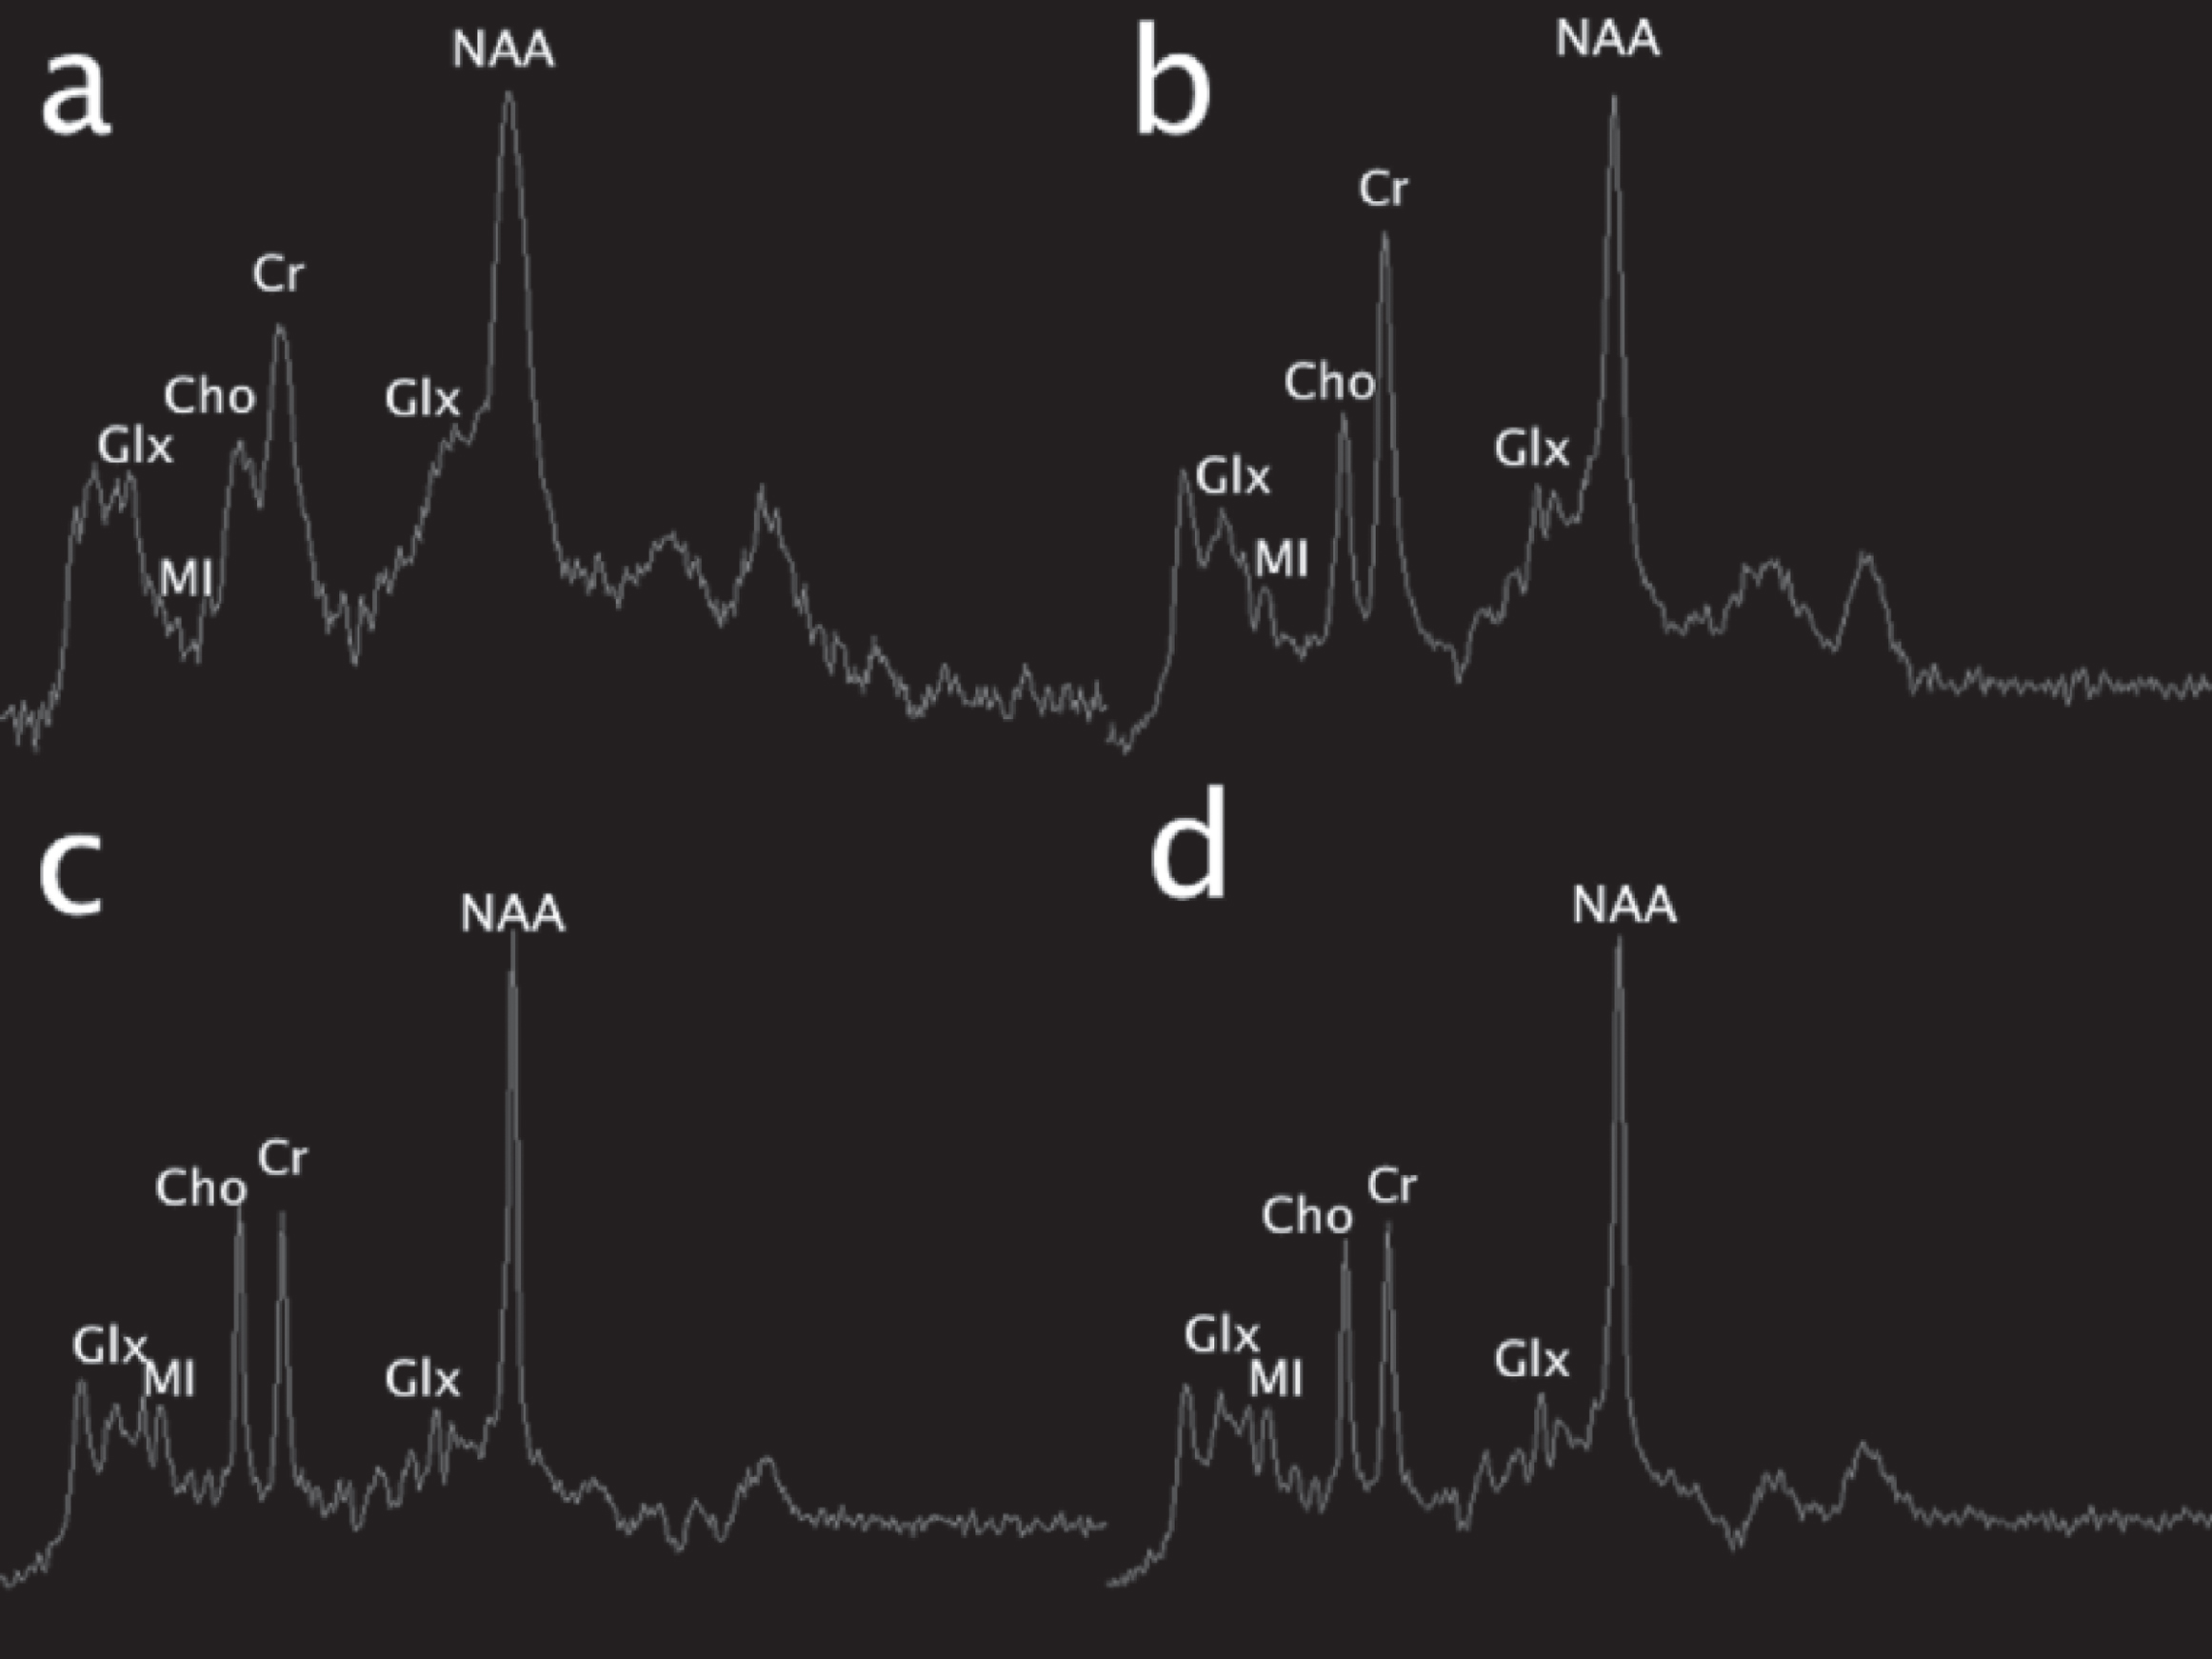 Single voxel MR spectroscopy (MRS) (TR/TE msec, 1500/35). Initial exam (a; left basal ganglia voxel) shows an elevated glutamine and glutamate peak complex at 2–2.5 ppm and 3.8 ppm (Glx) and reduction of myoinositol (MI). 19 days later, similar changes were present in the same area (b), though subtle differences cannot be discerned due to ferromagnetic artifact on the first study. On the pentultimate MRS performed 3 months later, no significant glutamine or glutamate elevation was present in the left parietal white matter; however, myoinositol was mildly depressed. On the final MRS performed at 6-month follow-up over the left basal ganglia, similar changes are noted; glutamine remains well-controlled and myoinositol and choline (Cho) were mildly depressed.